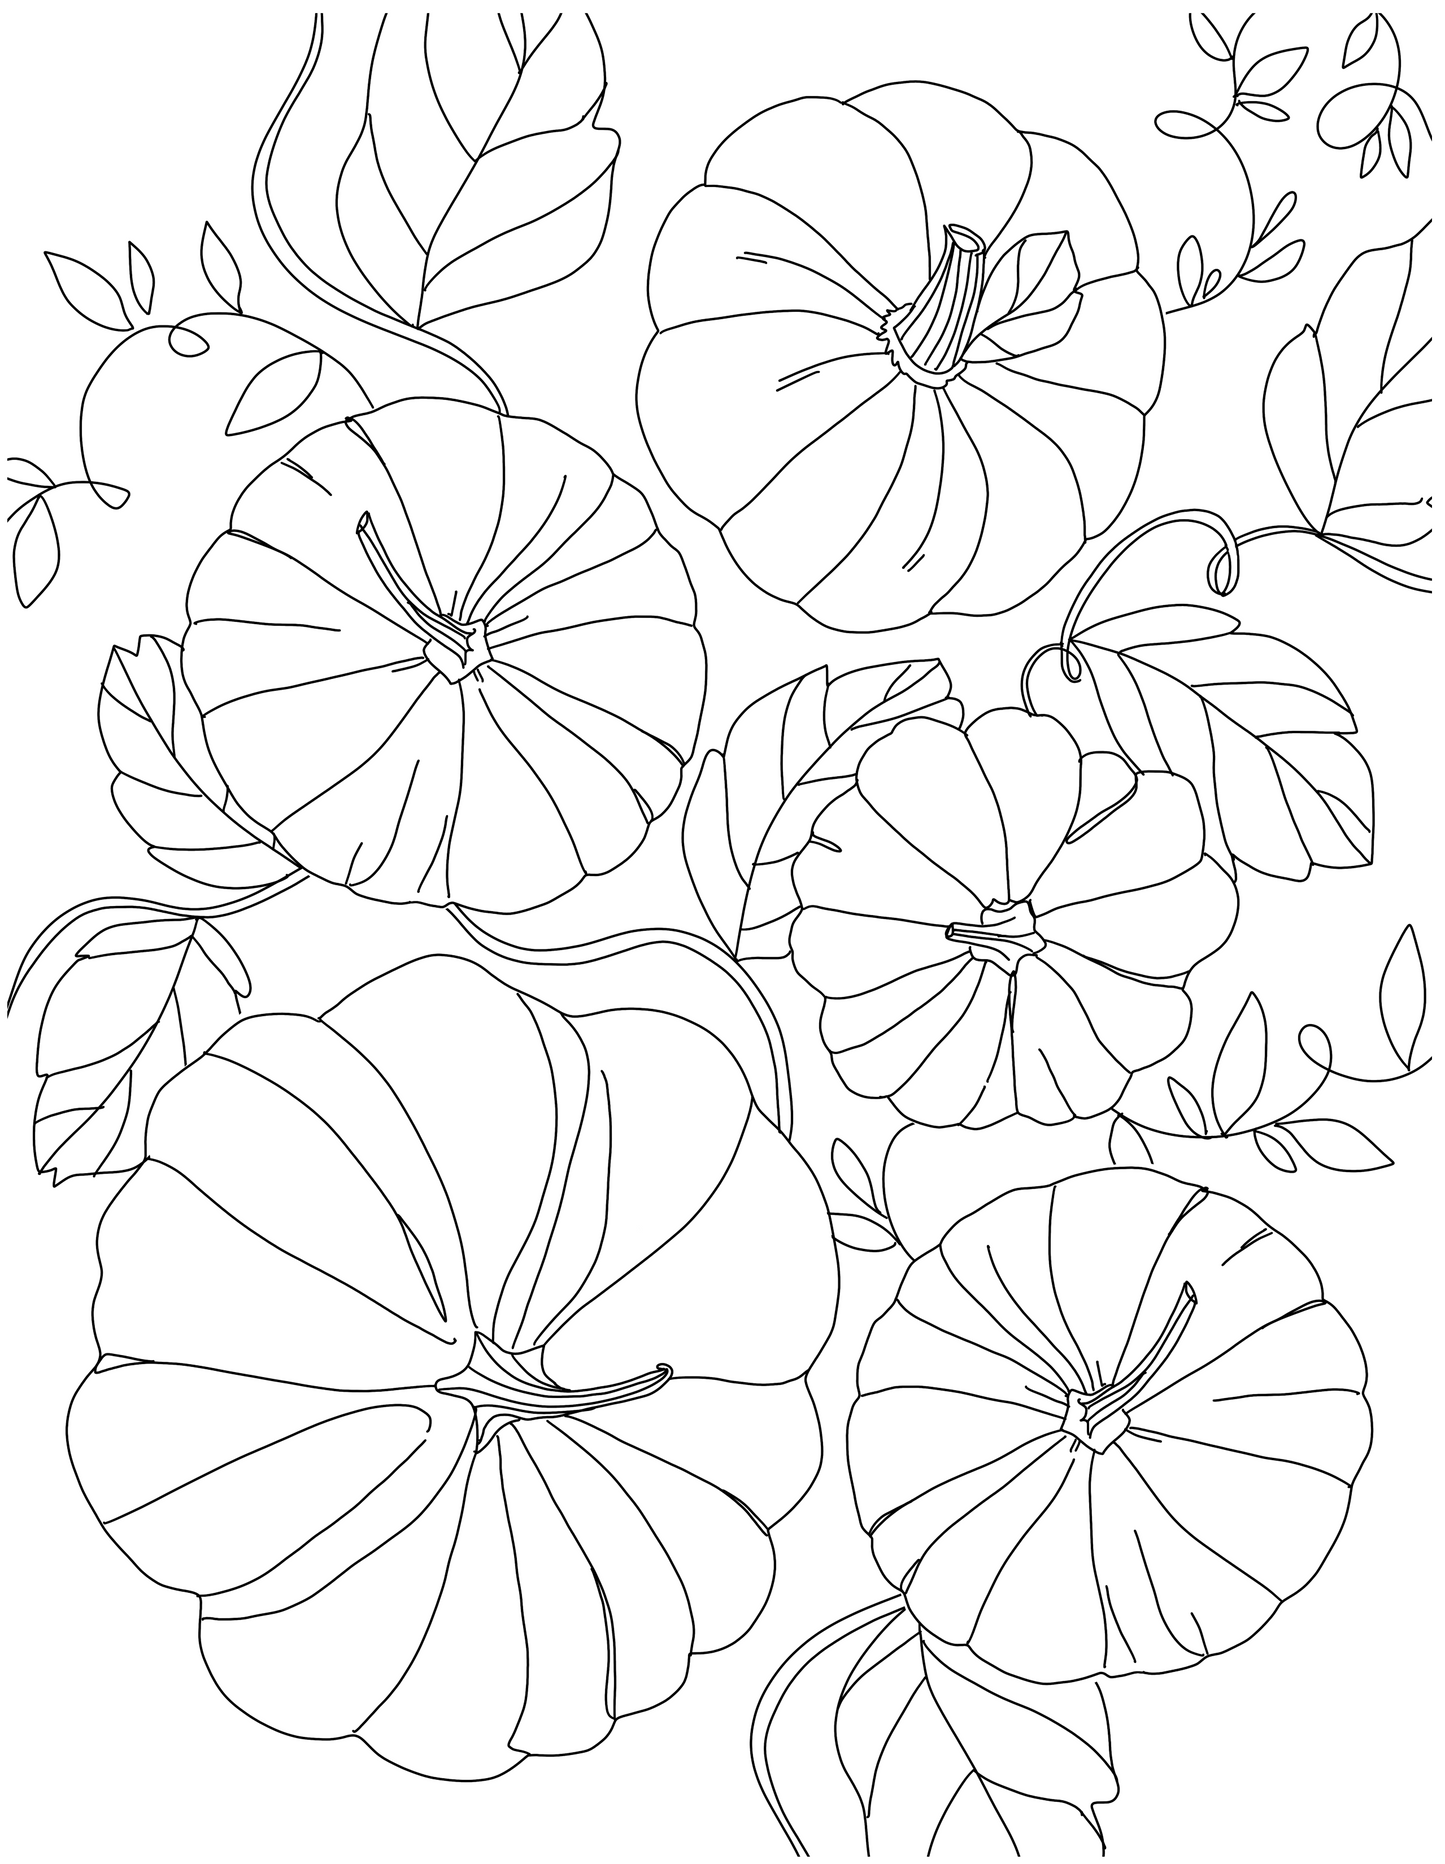 Thanksgiving - Free Coloring Pages